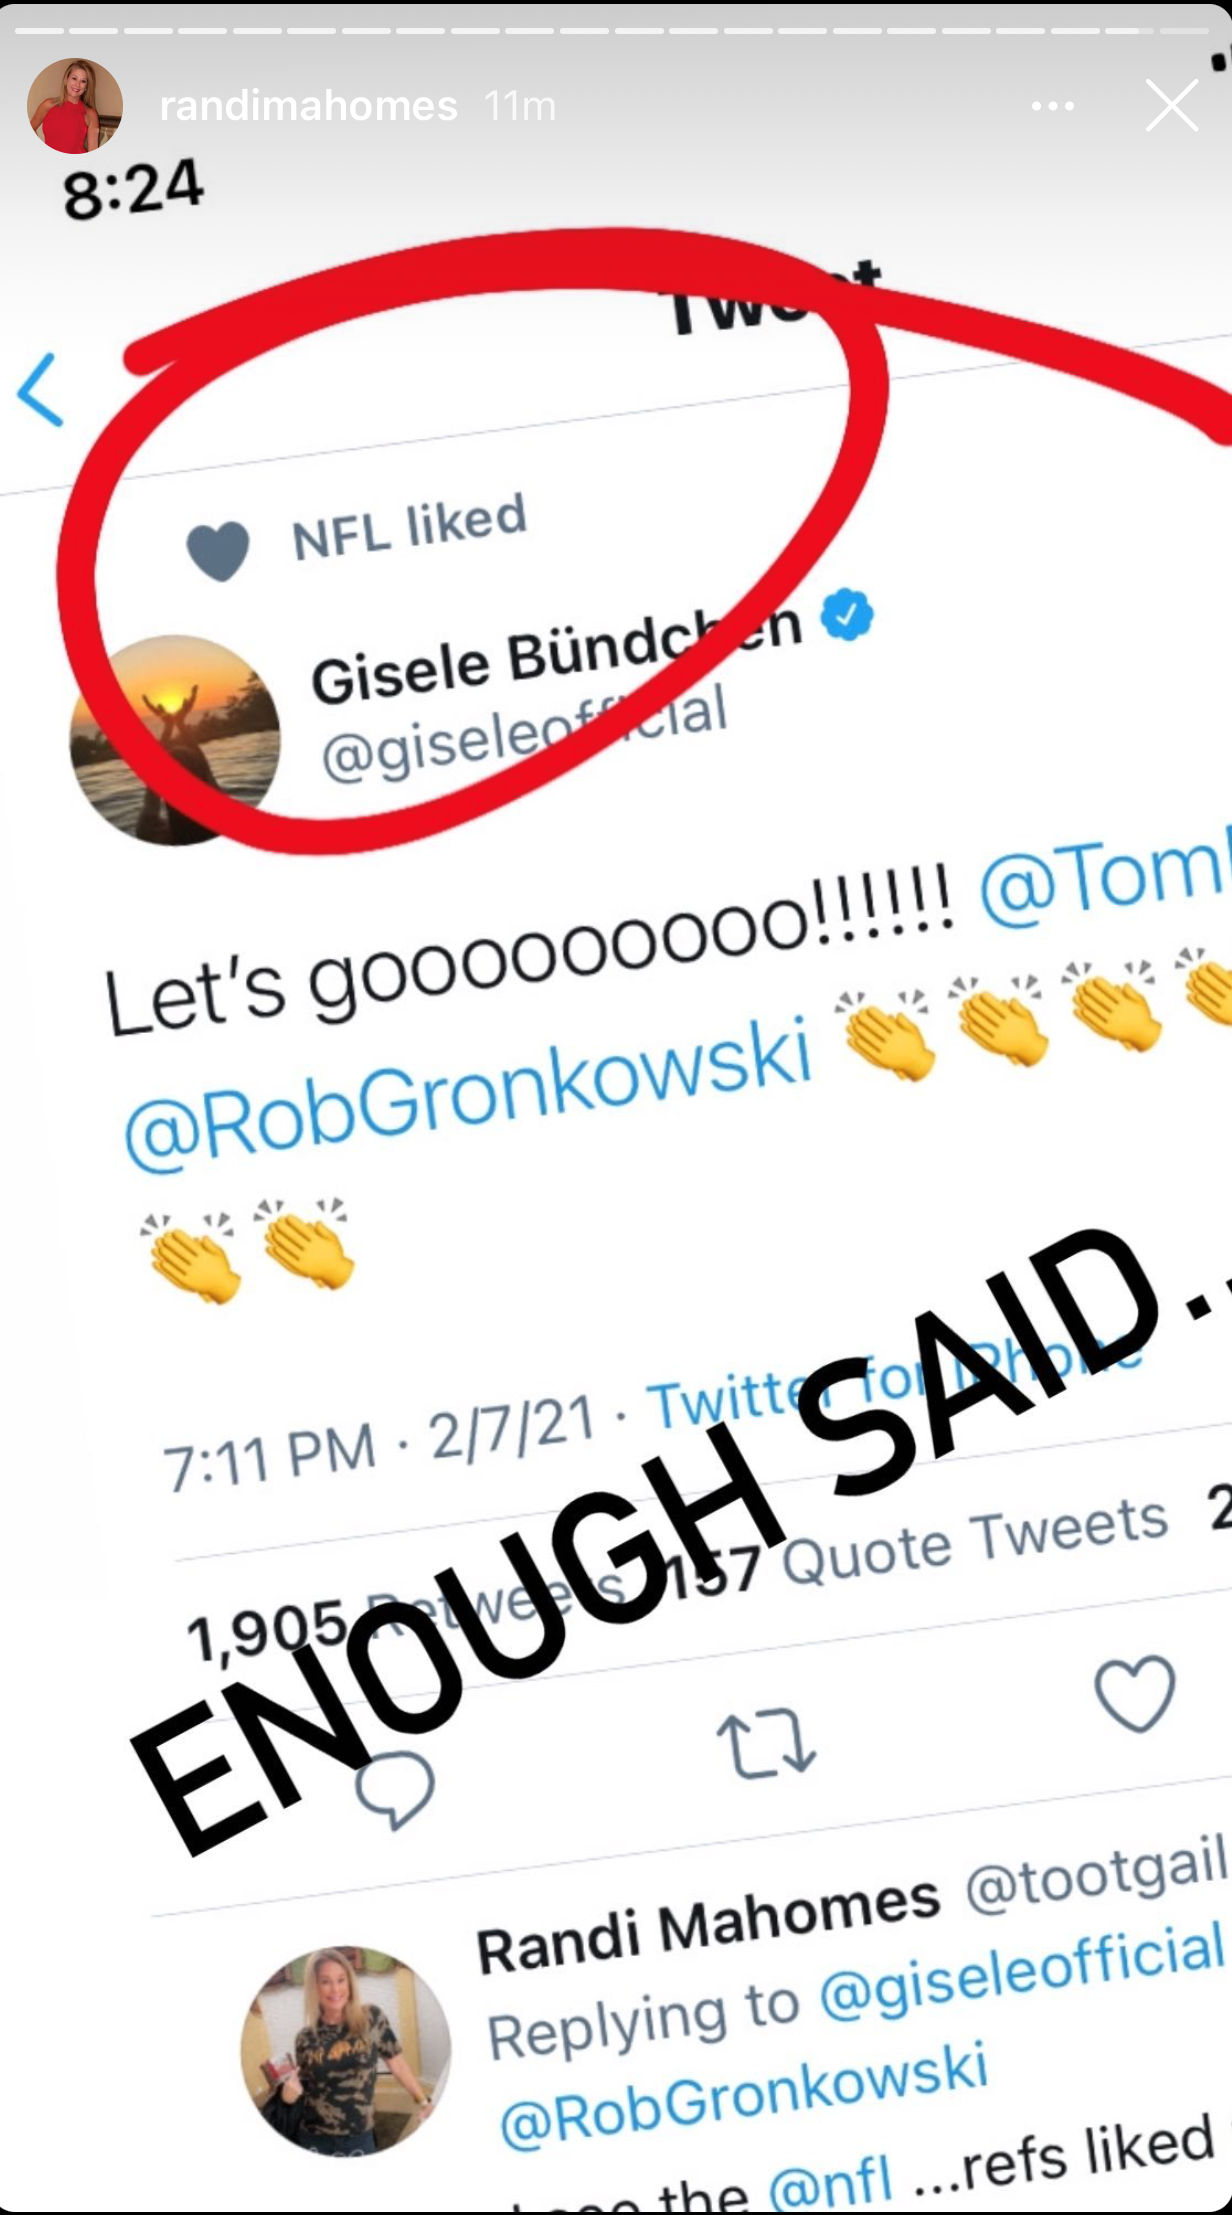 Patrick Mahomes' Mom Tweeted at Gisele Bundchen During 2021 Super